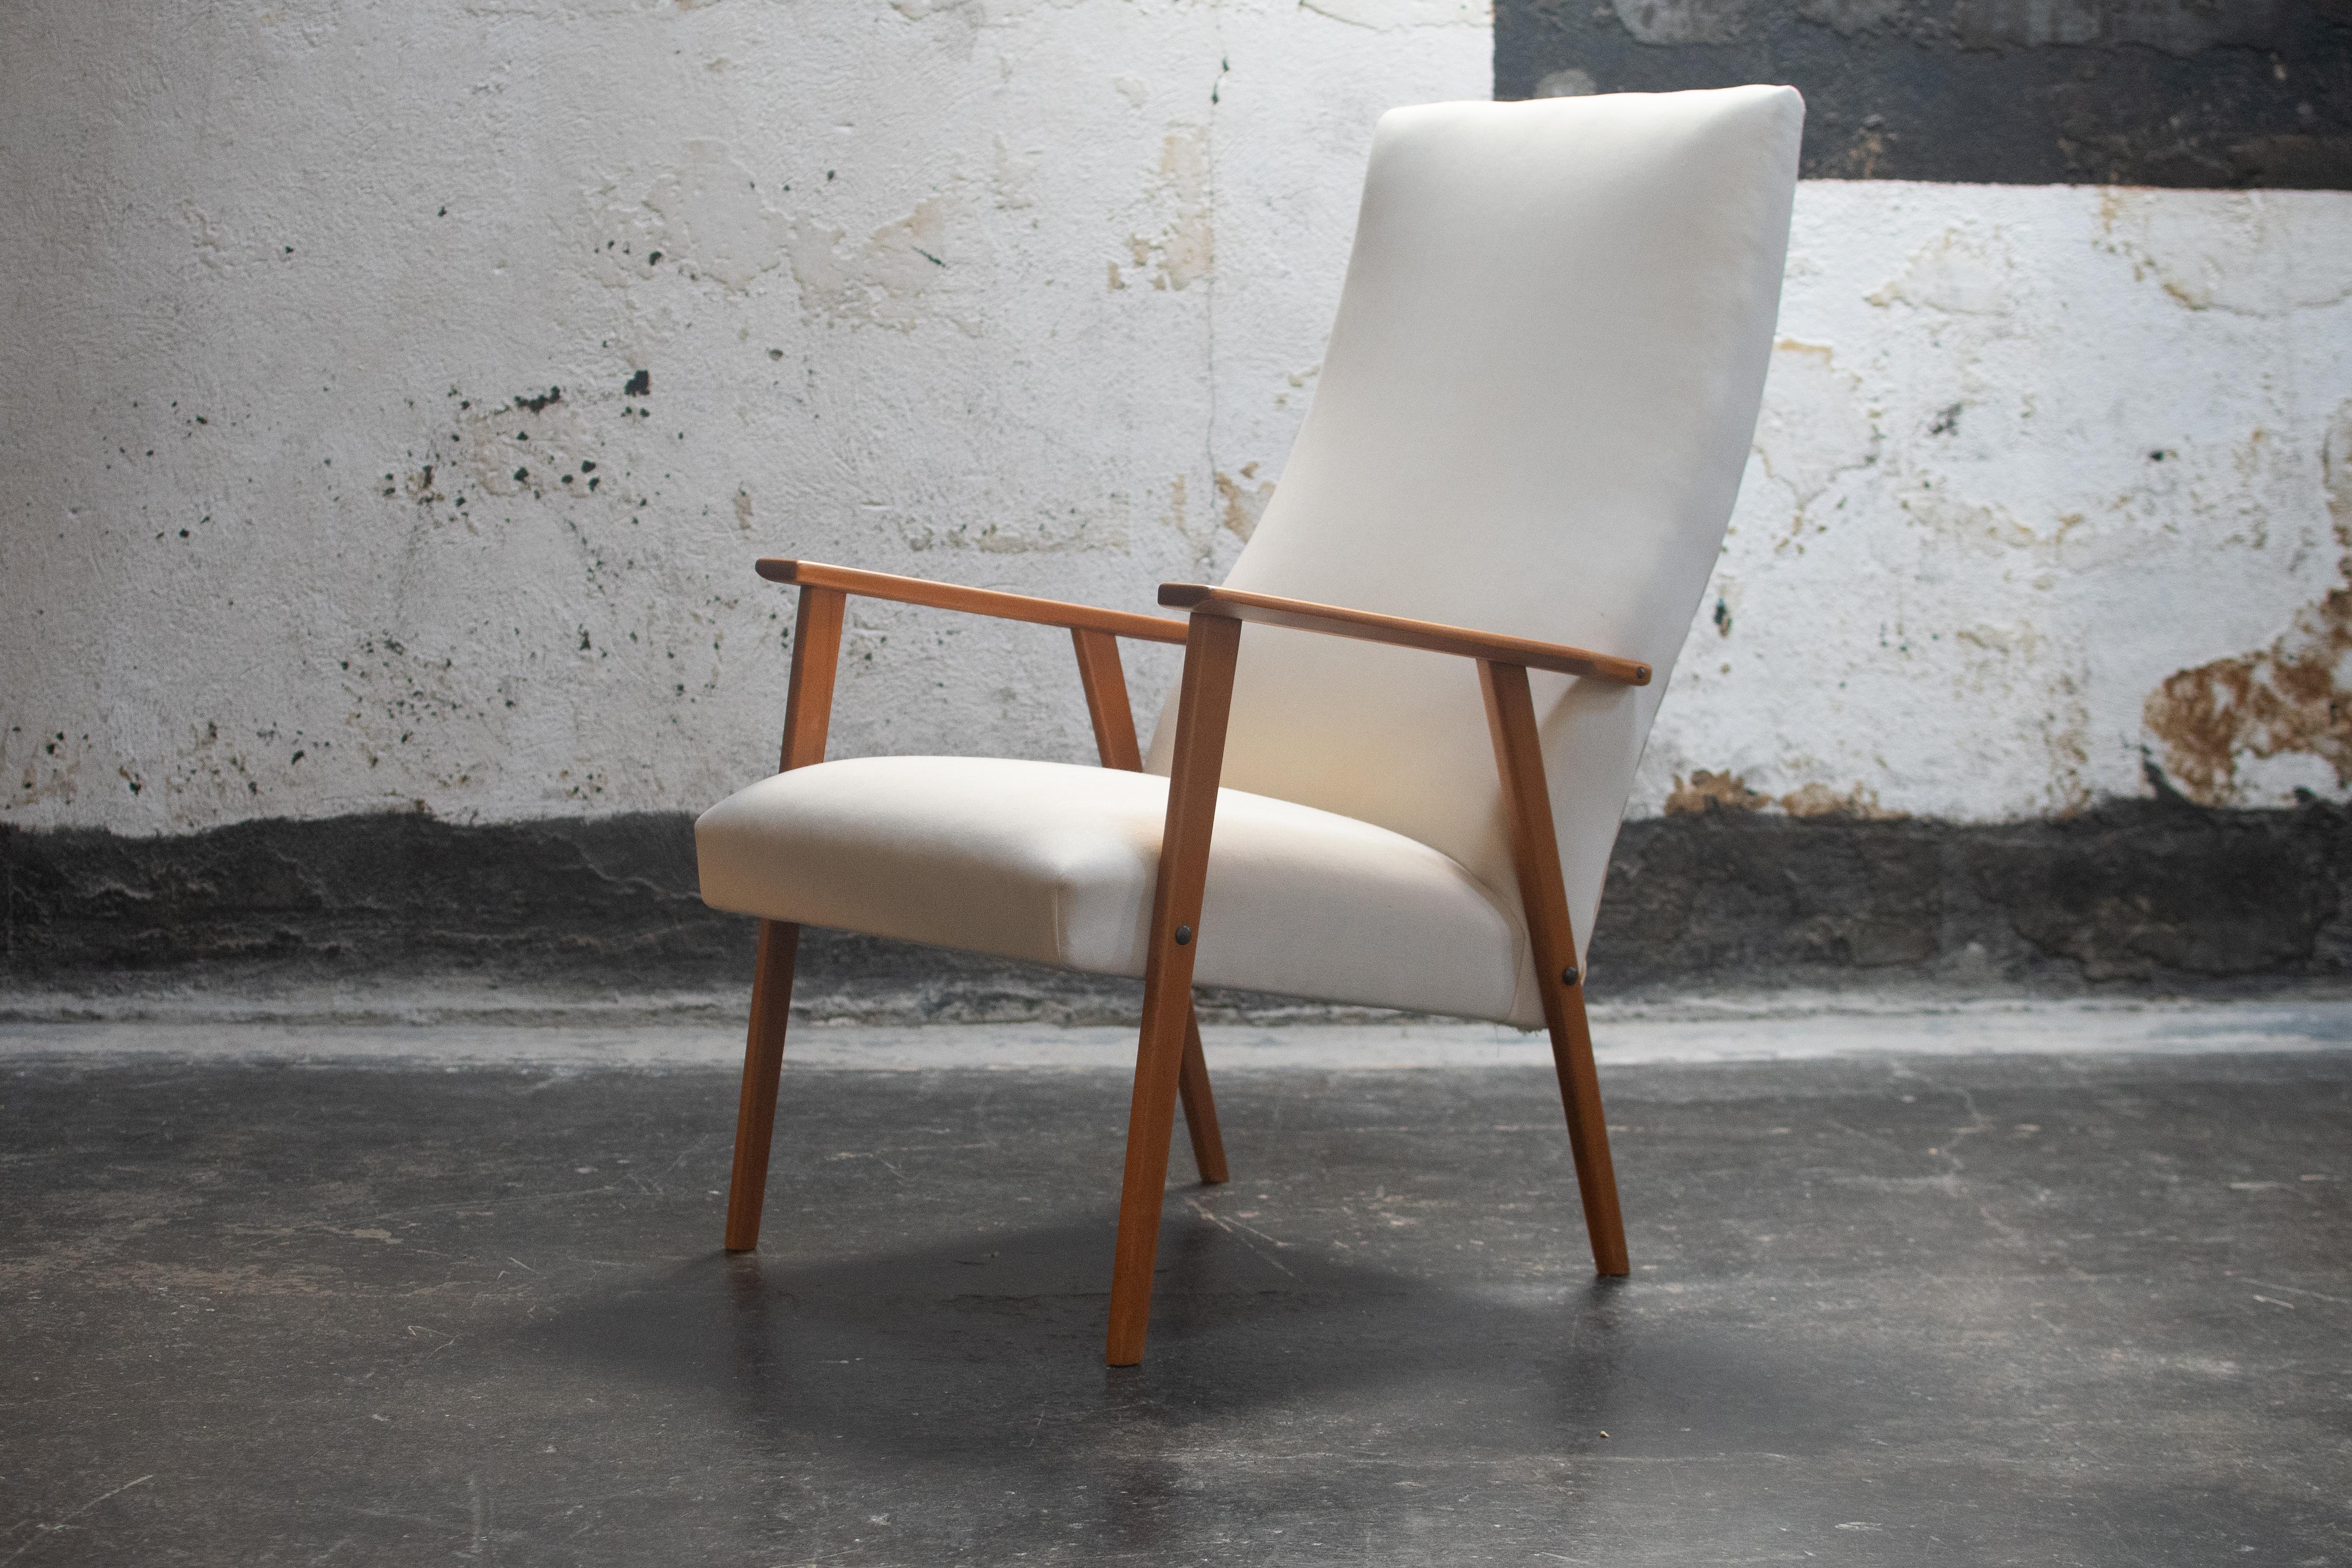 Single Swedish easy chair in muslin. The tall mod style back has a deep pitch, perfect for reclining. Light teak angled legs support a square geometric seat and back.  Swedish wood holds shape and condition due to the extreme cold temperatures, it